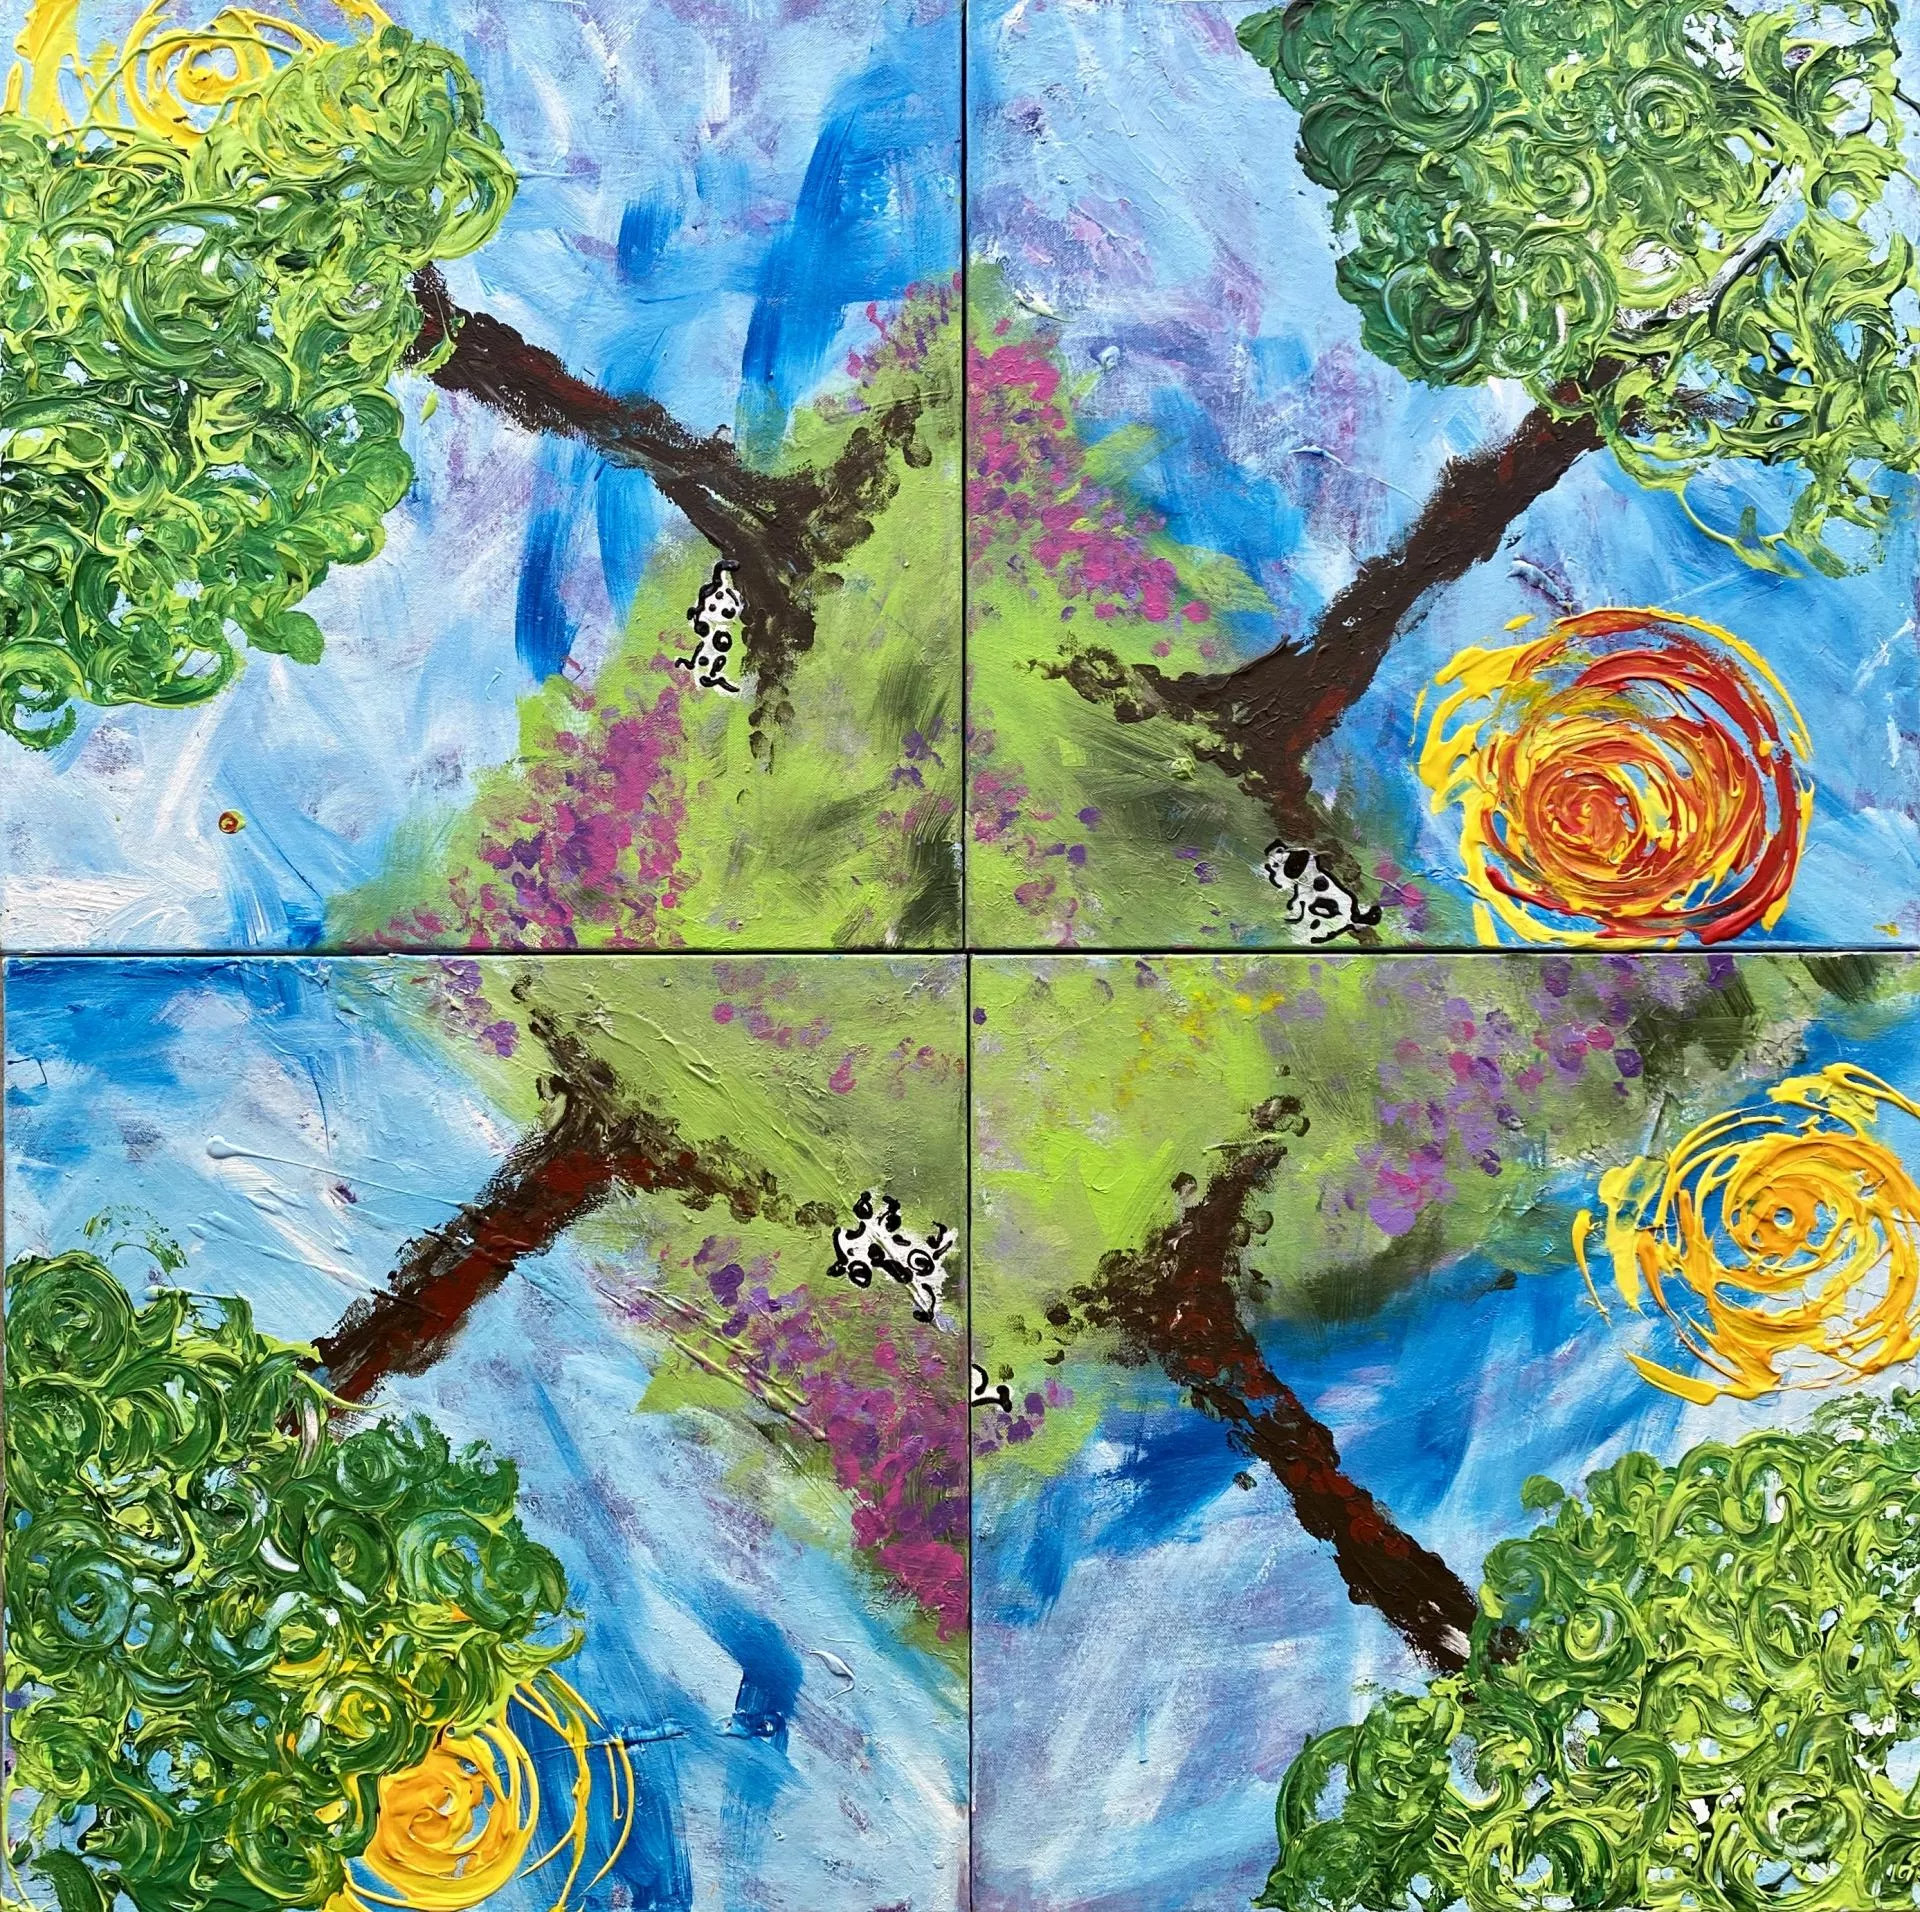 A work is made up of four quadrants in movement, showing the same tree with a dark brown truck and swirling green foliage. Each quadrant has a swirling sun at a different time of the day. It represents a beautiful and happy day somewhere.